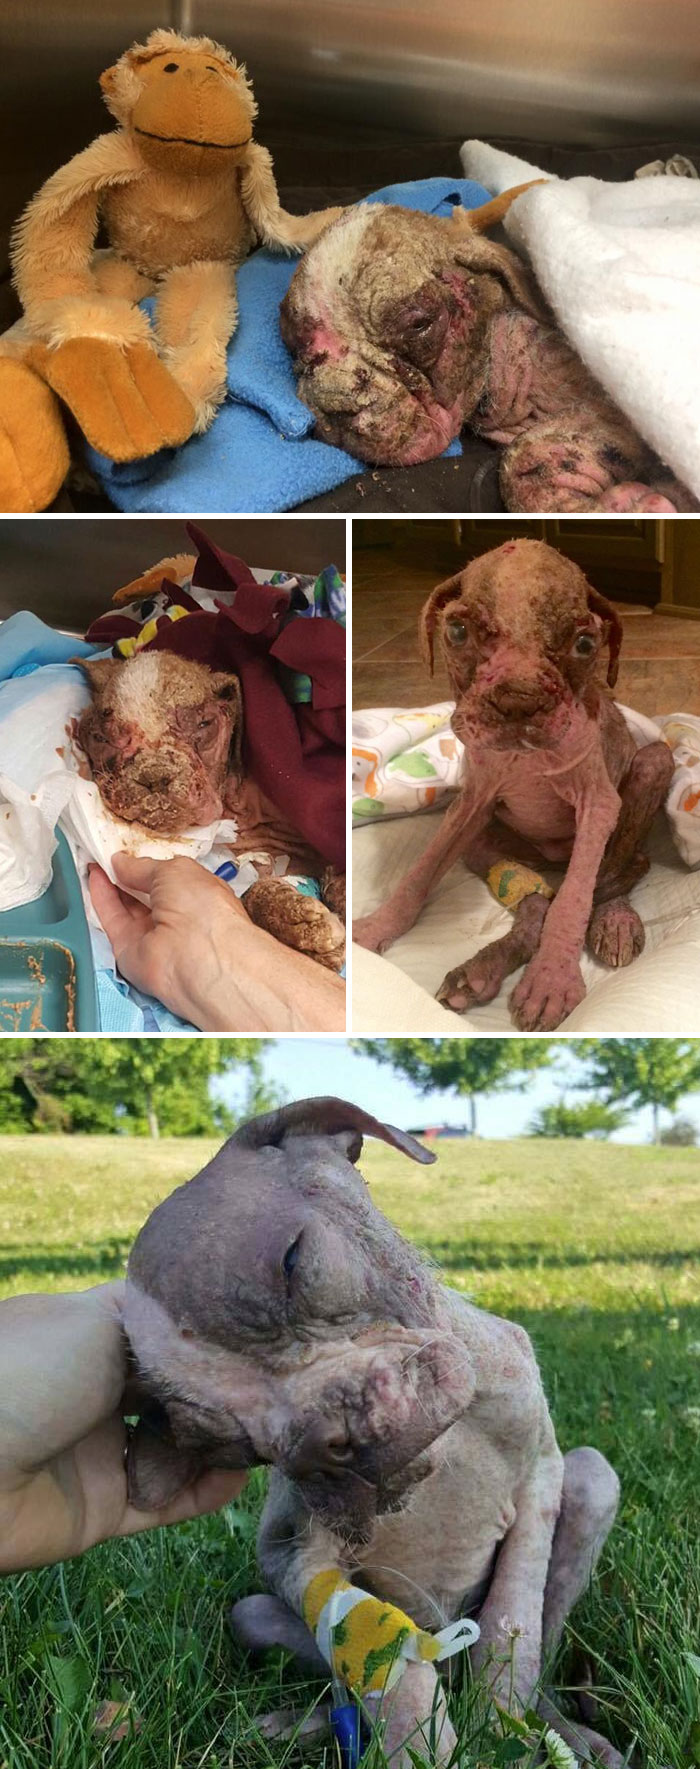 Abandoned Puppy Who Was Found So Weak The He Couldn’t Stand, Emaciated, Dehydrated,and His Skin Was So Maggot-Infested He Gave Off A Rotting Smell, Gets Saved By The Good Care Of Pennsylvania Veterinary Hospital